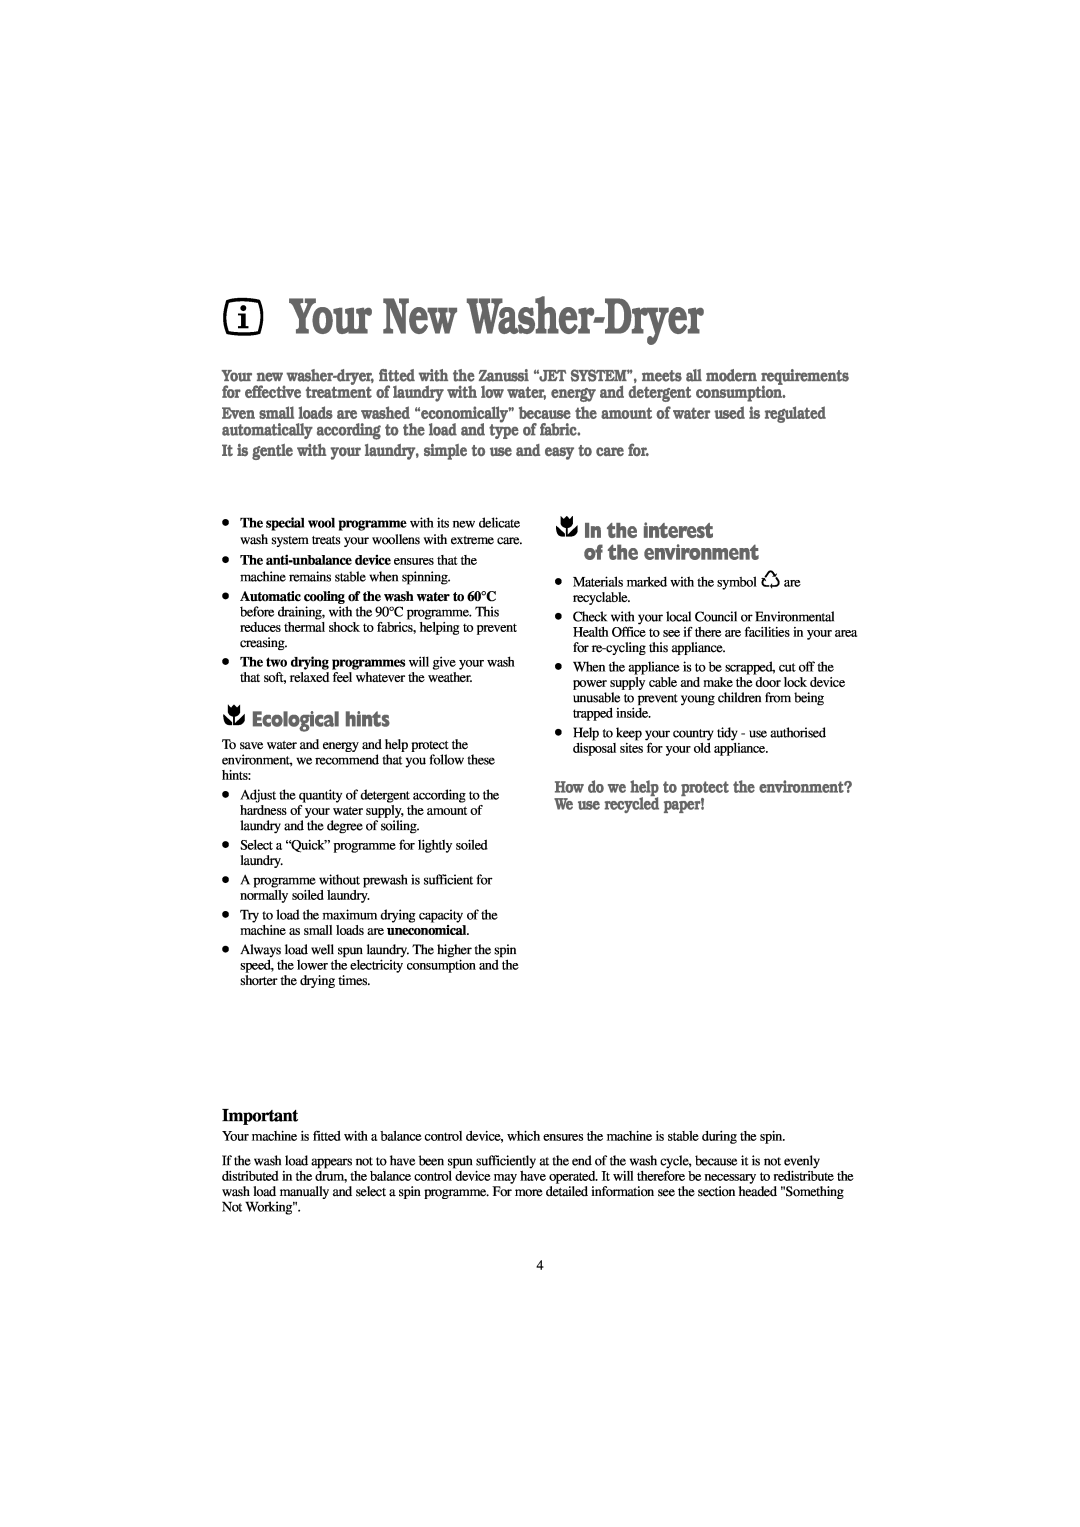 Zanussi WJD 1457 W, WJD 1357 S, WJD 1257 S manual Your New Washer-Dryer, Ecological hints, In the interest of the environment 